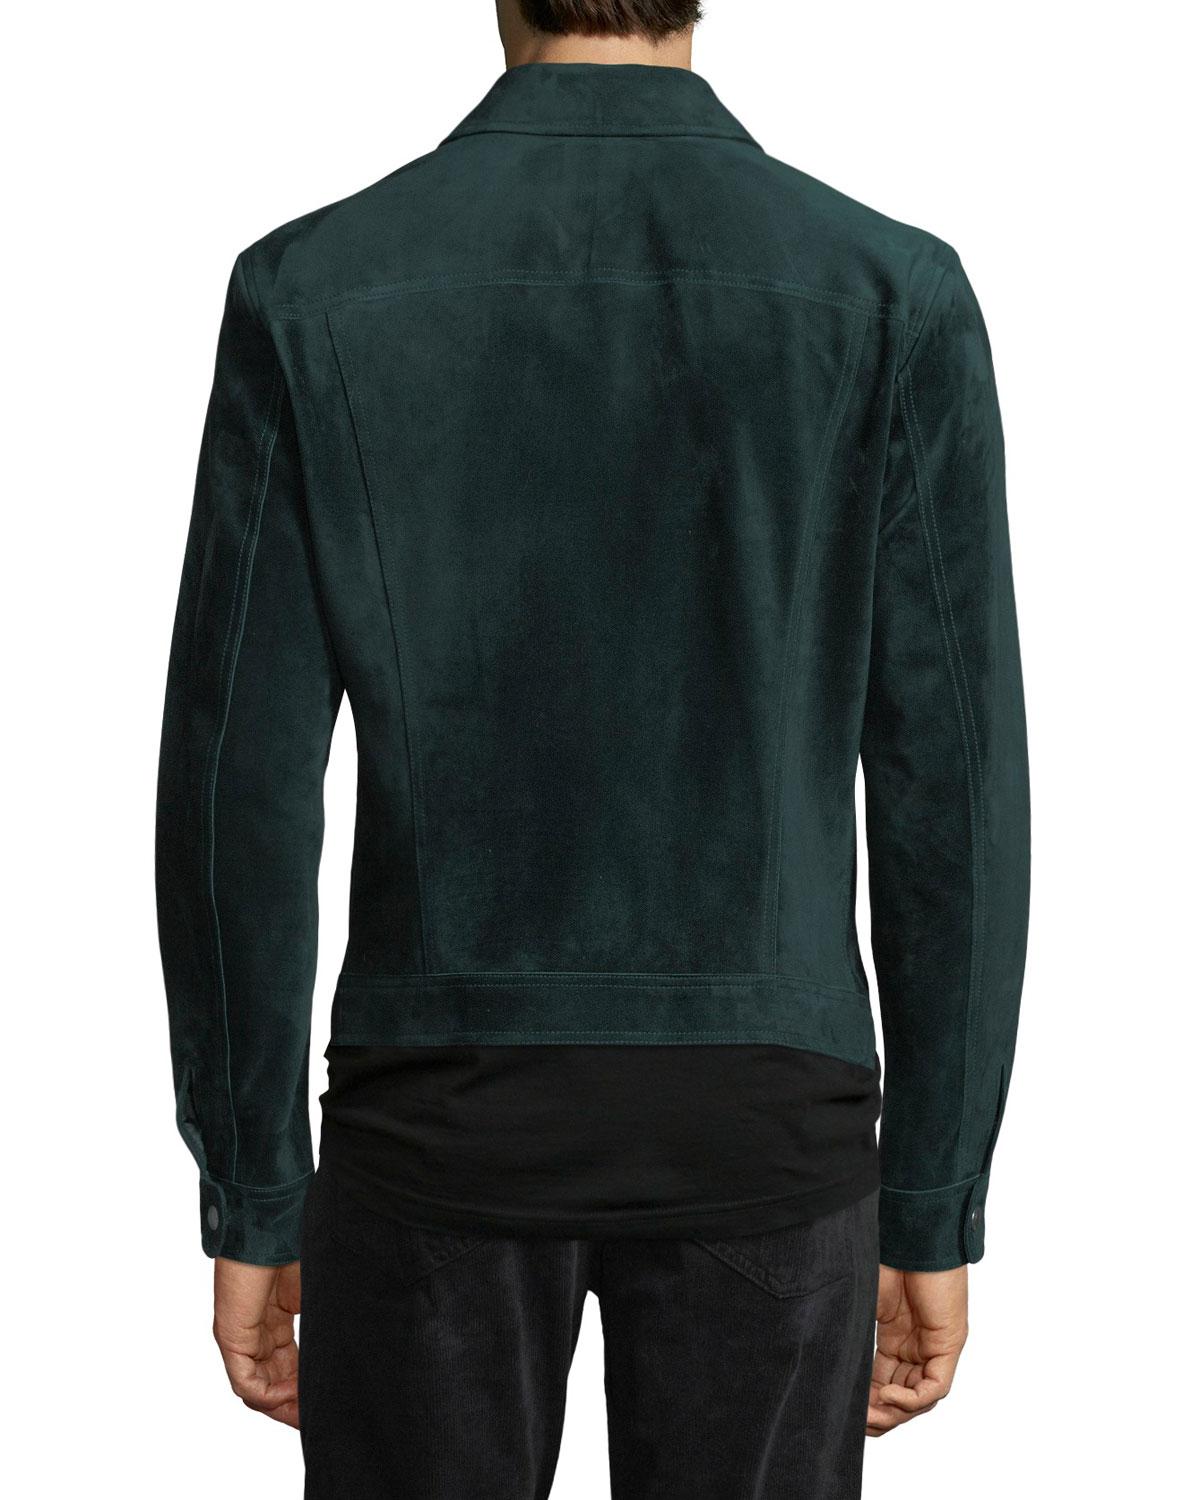 Tom Ford Emerald Suede Jean Jacket in Green for Men - Lyst